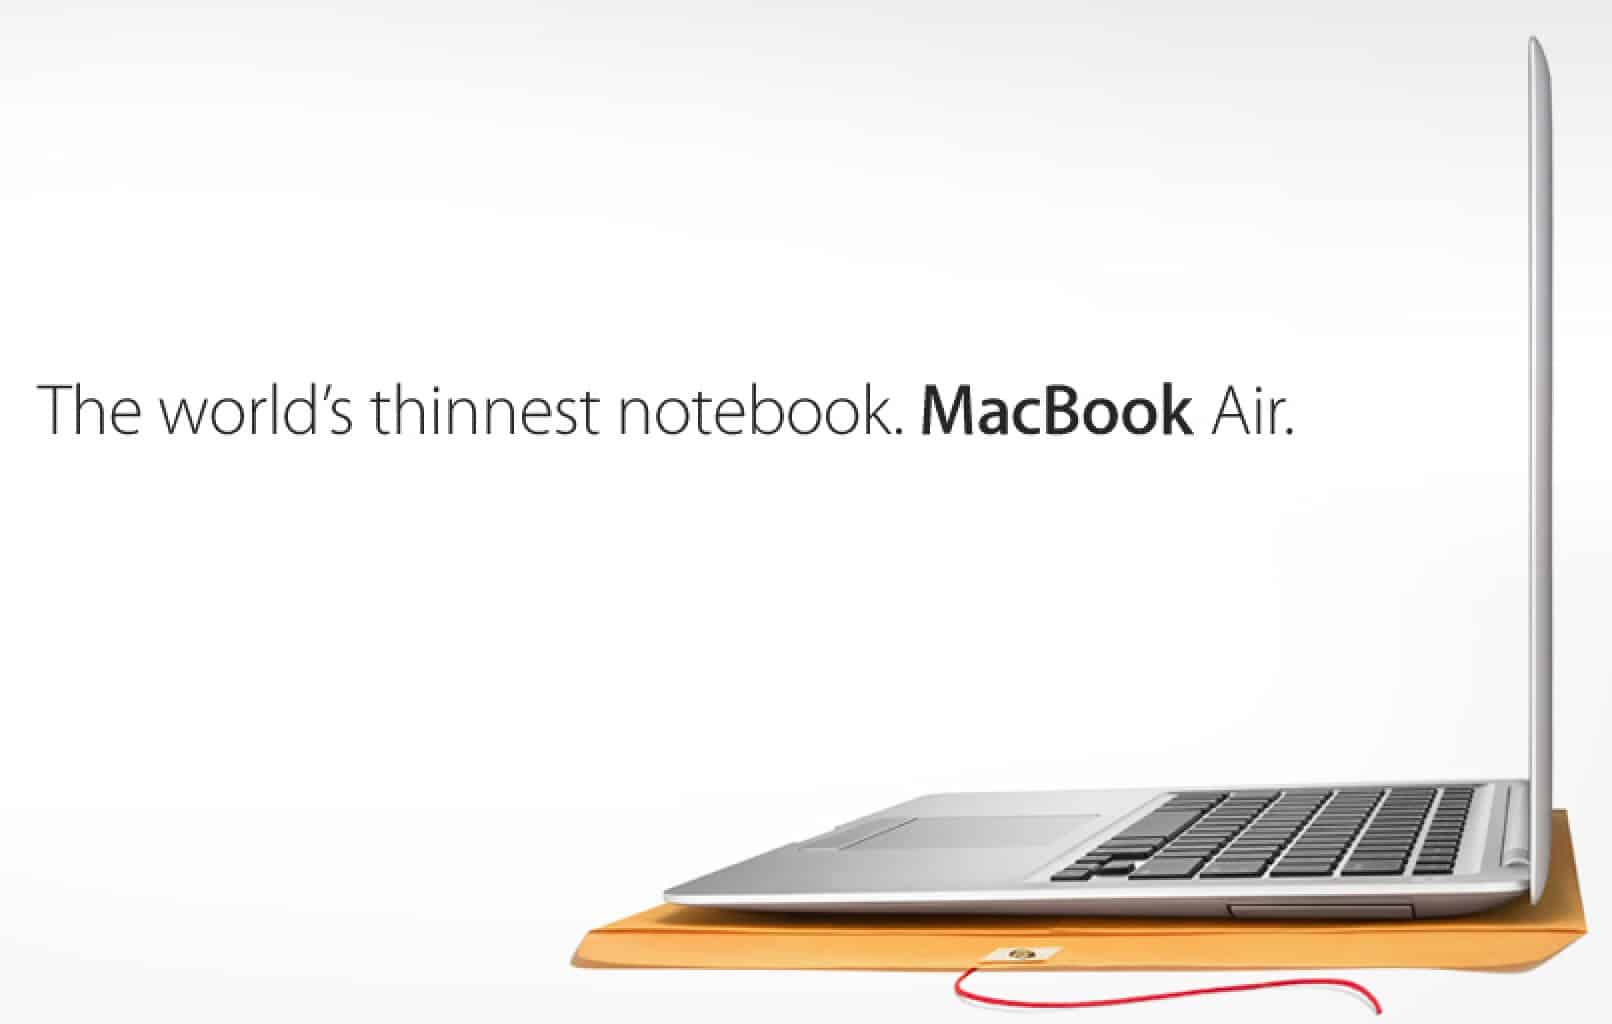 A plain manila envelope became a key stage prop for selling the MacBook Air, "the world's thinnest notebook."